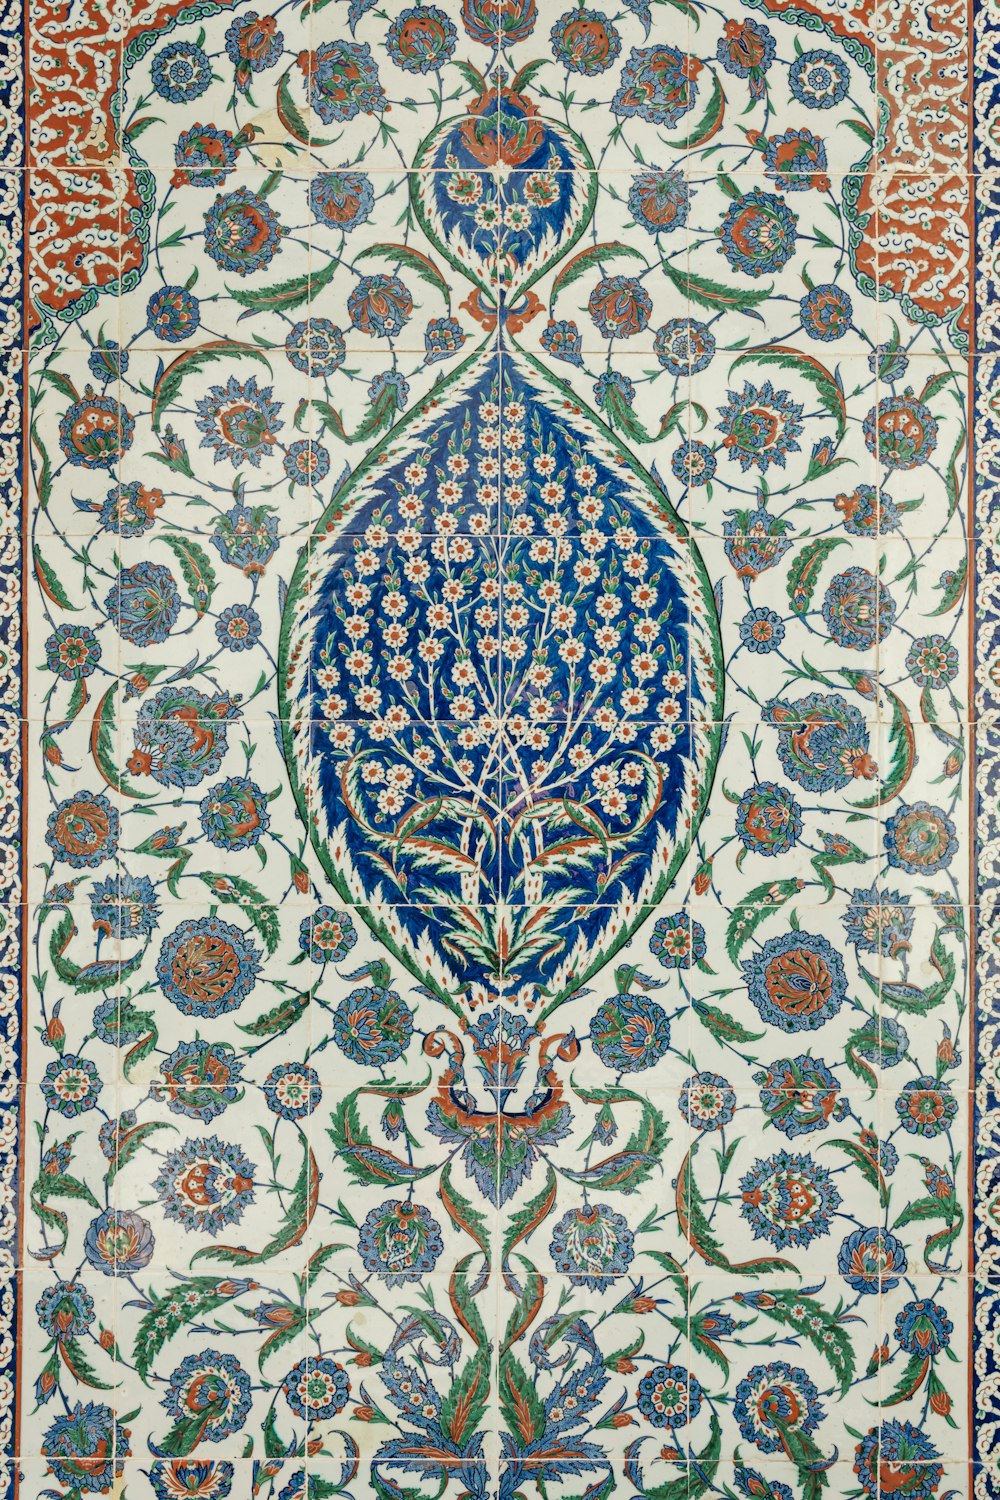 an intricately designed rug with blue and green flowers